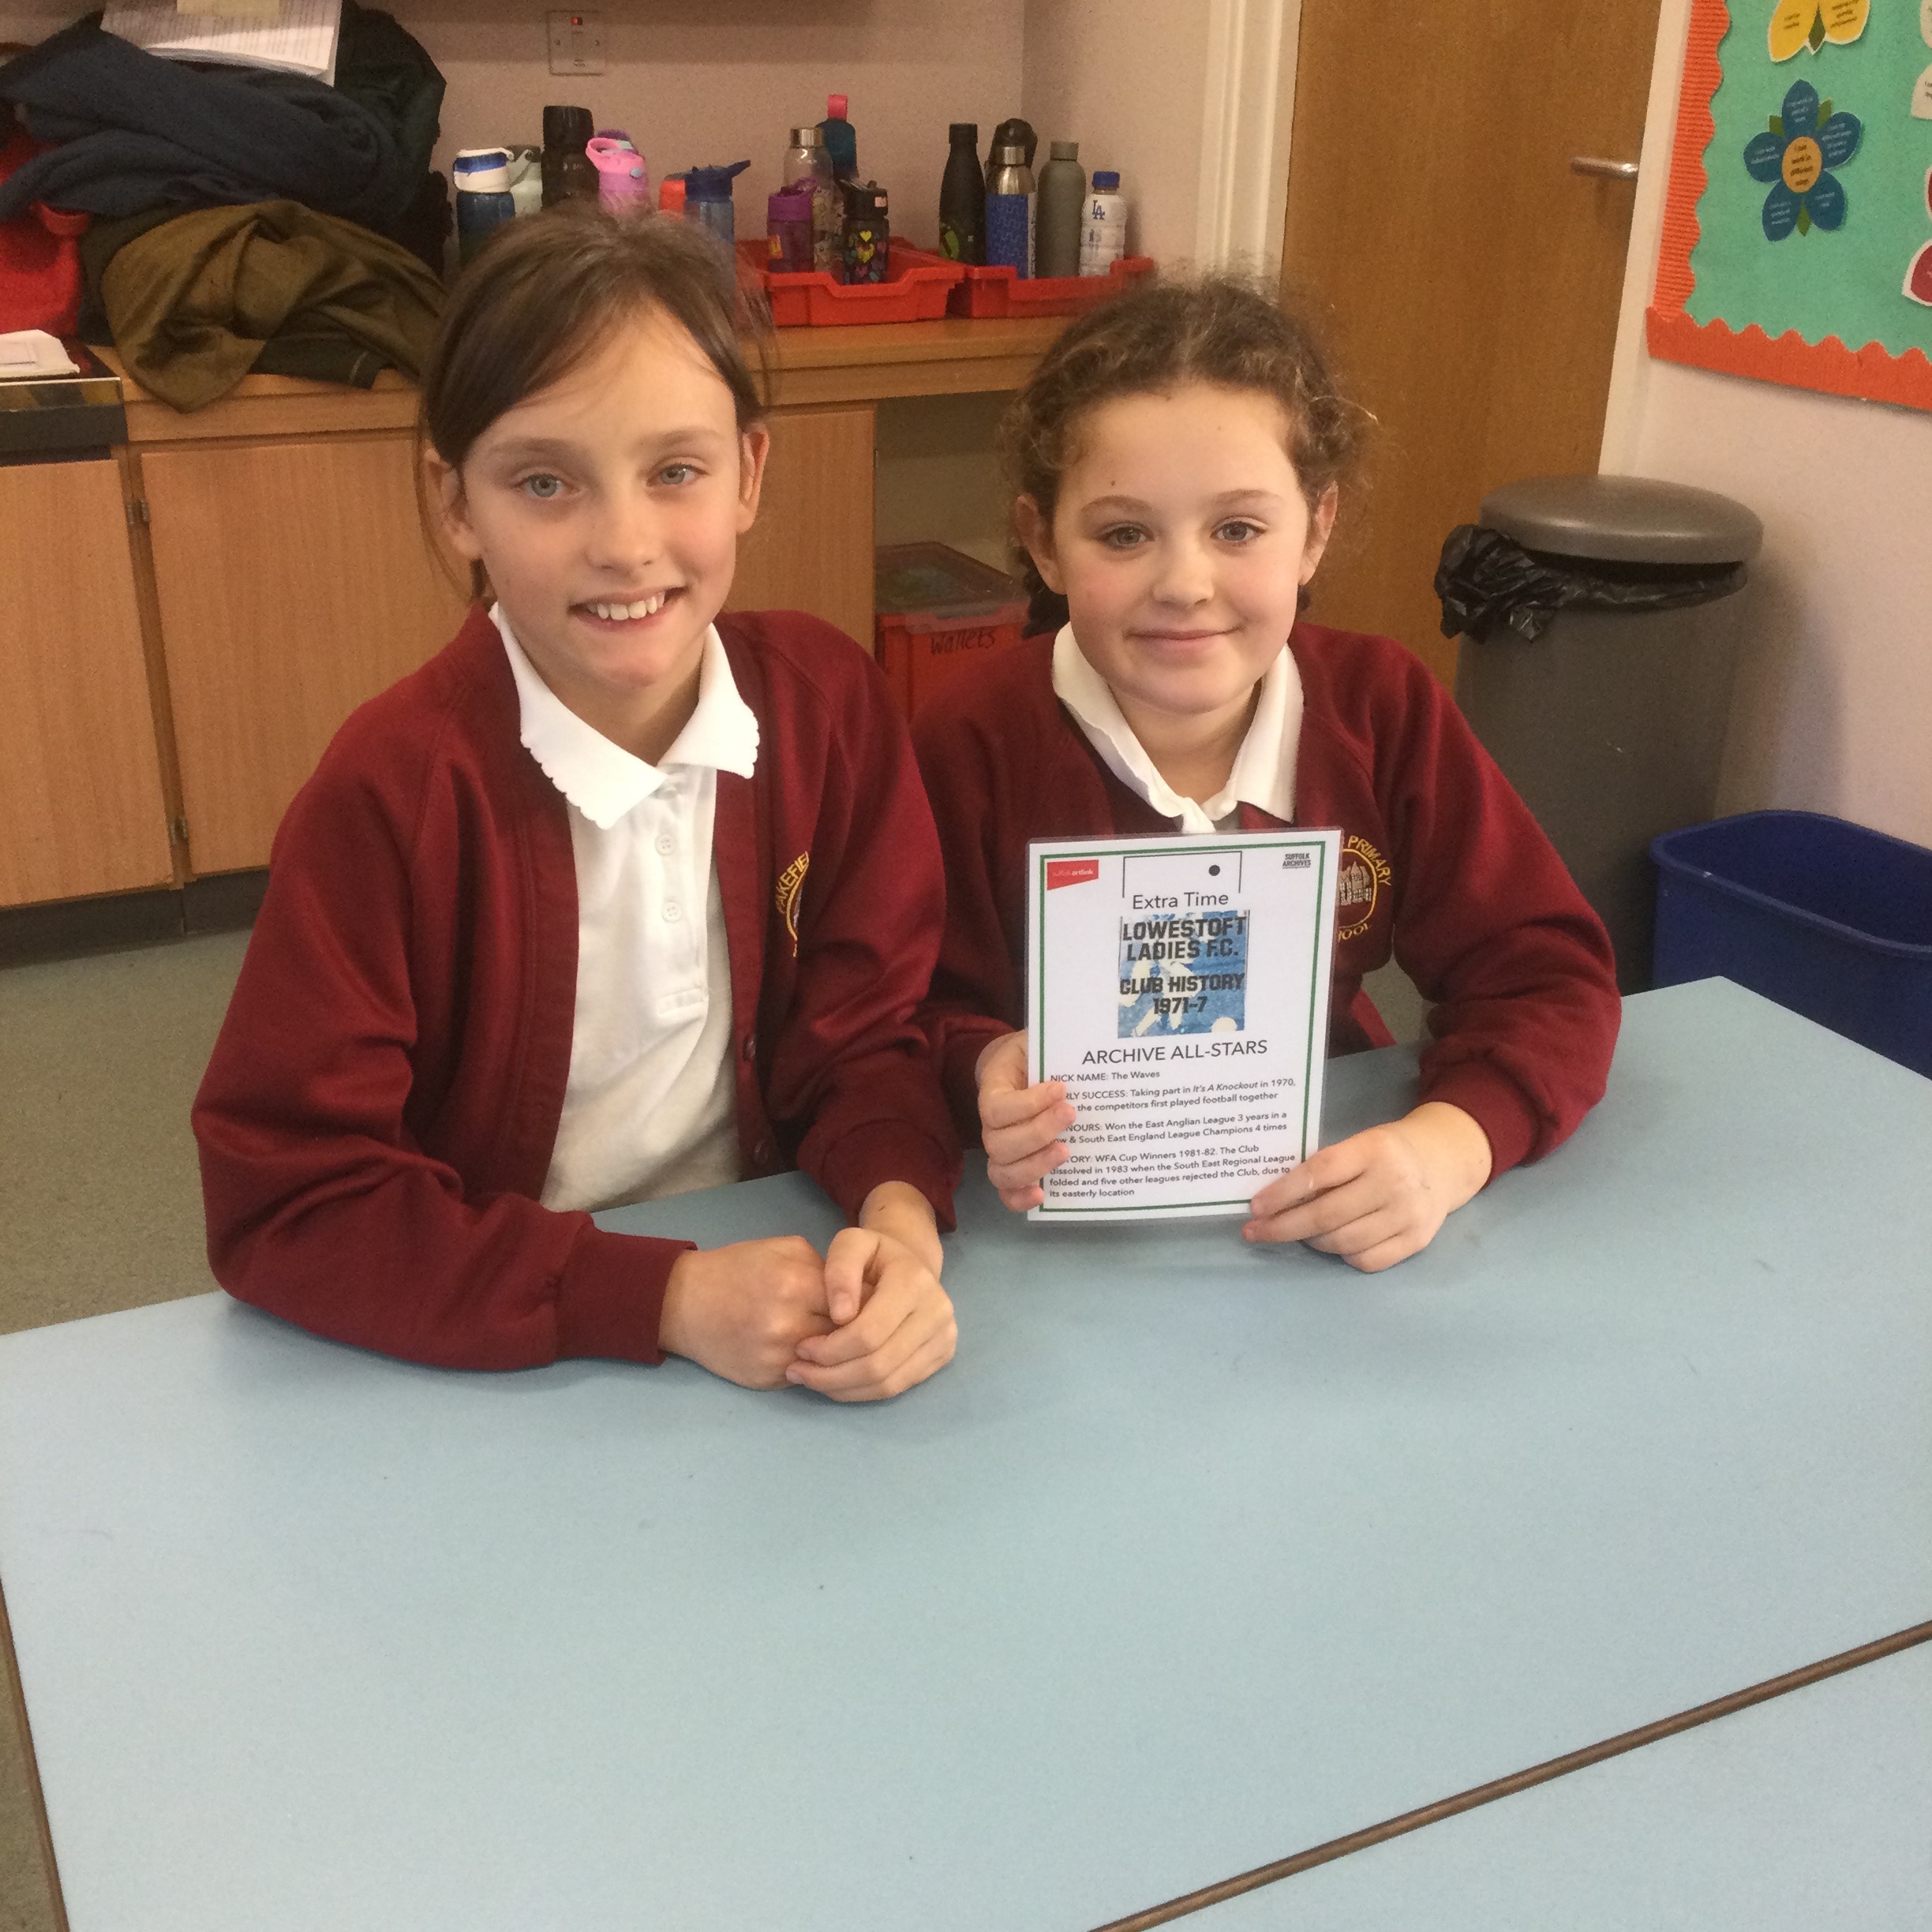 Two school girls face the camera, they are seated at a blue table and holding up a plasticised card about Lowestoft Ladies FC